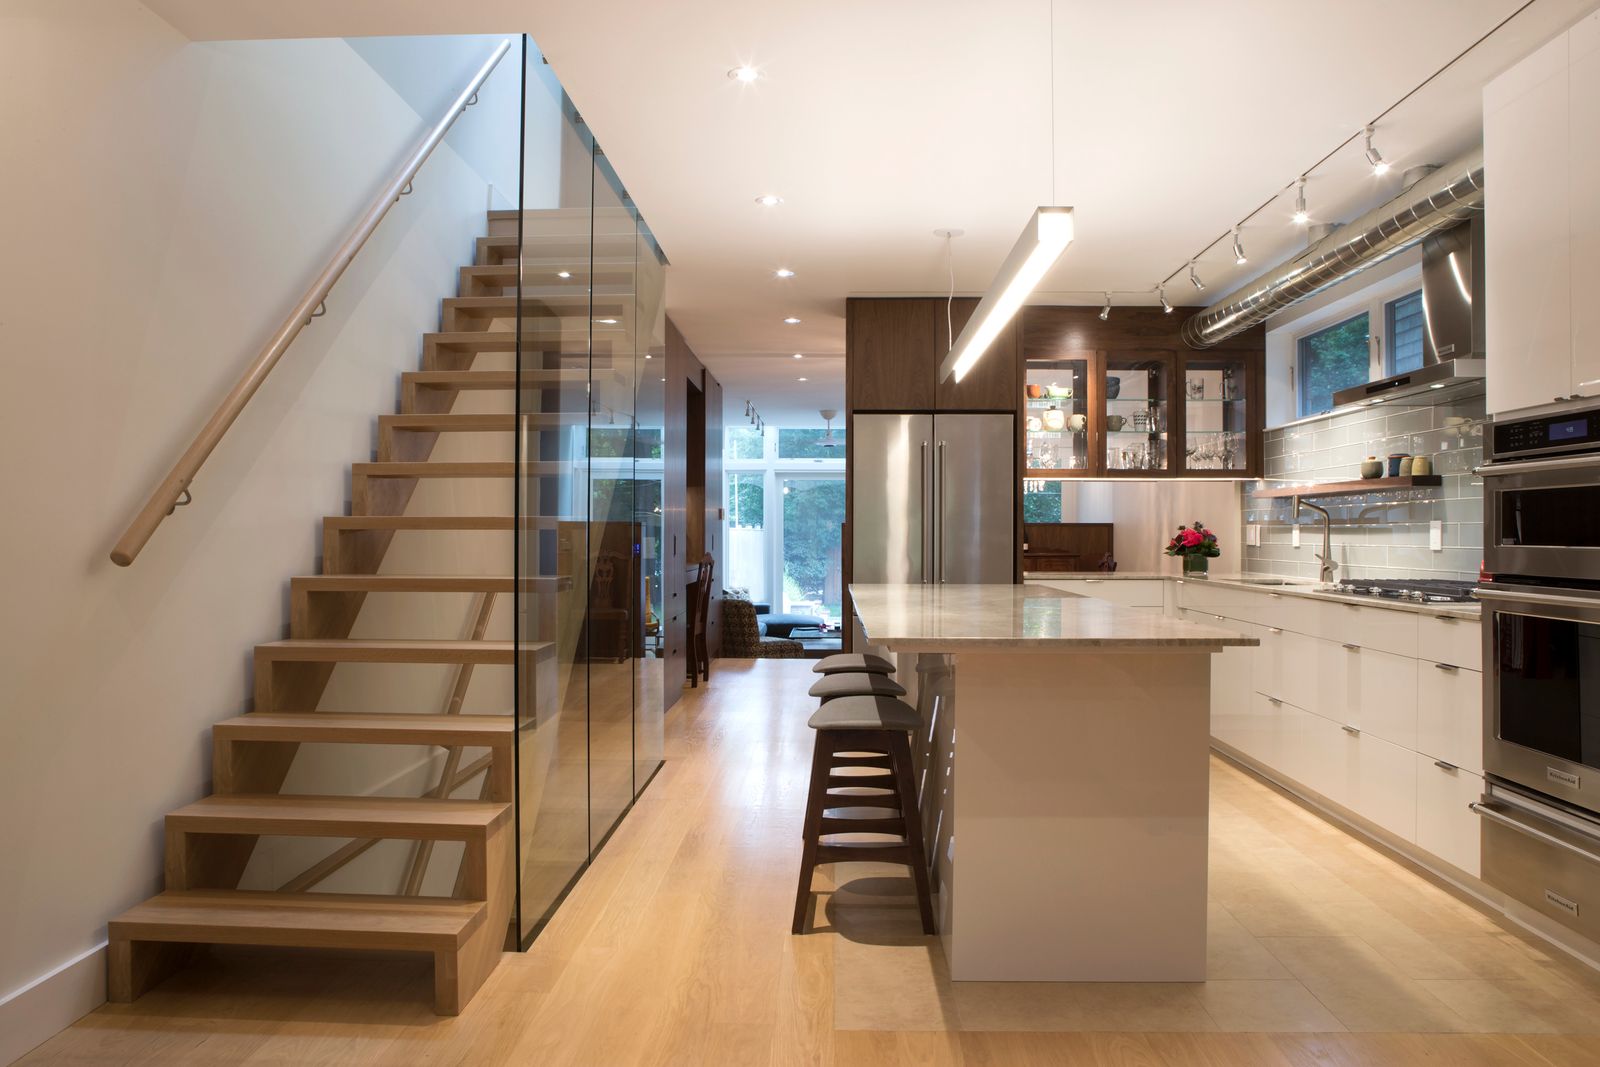 Custom kitchen renovation in Toronto with floating staircase and glass siding